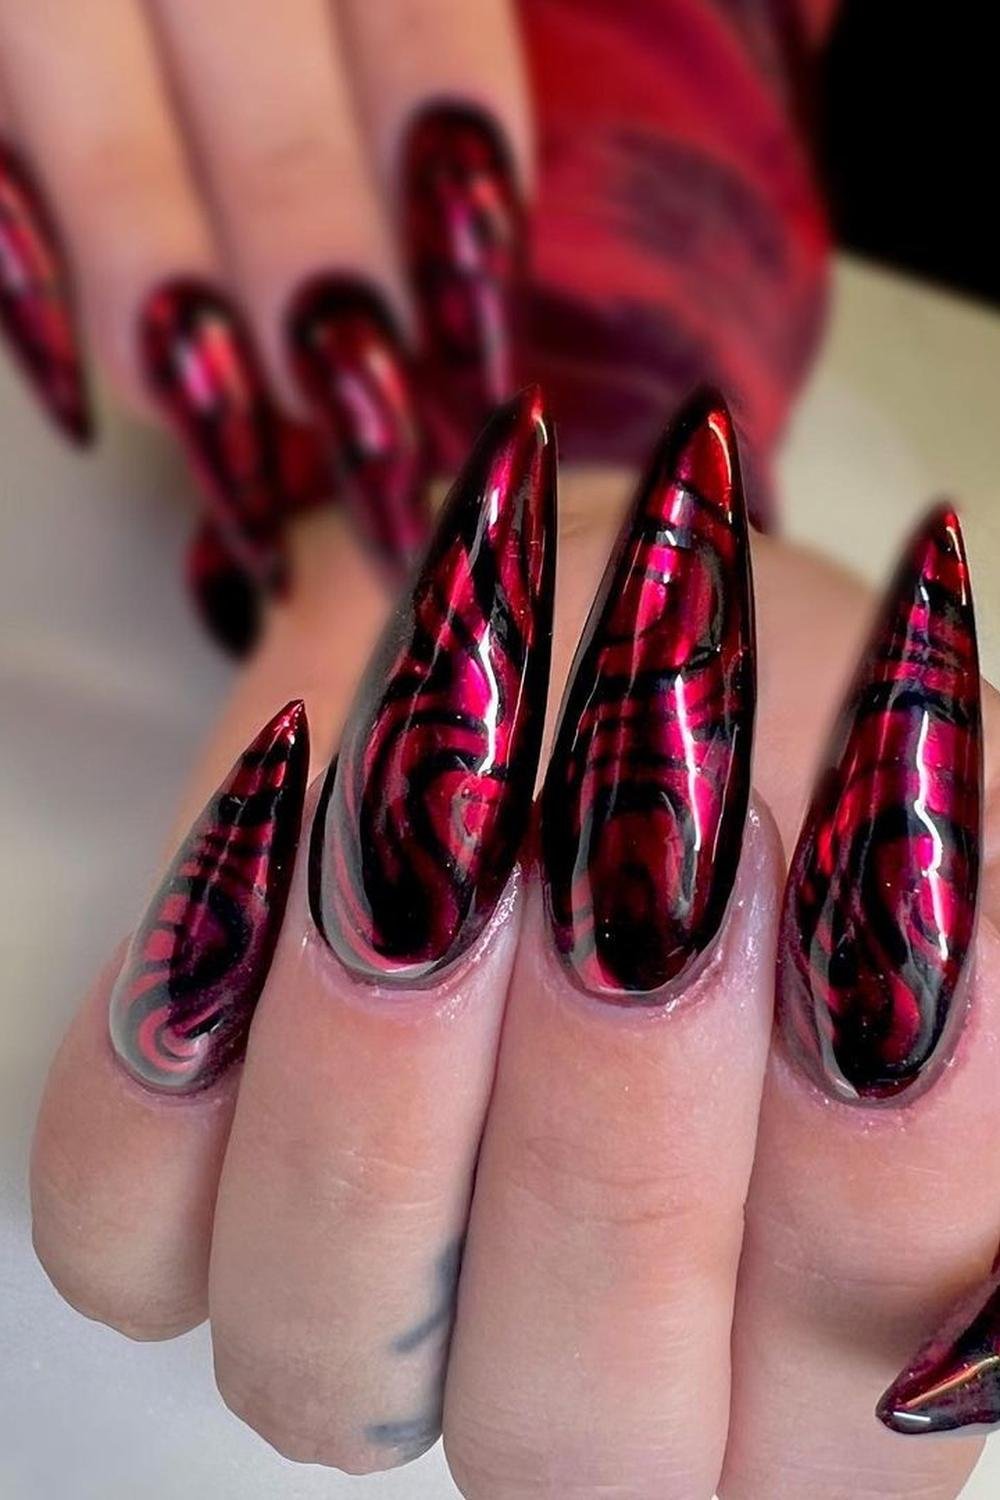 5 - Picture of Red Chrome Nails